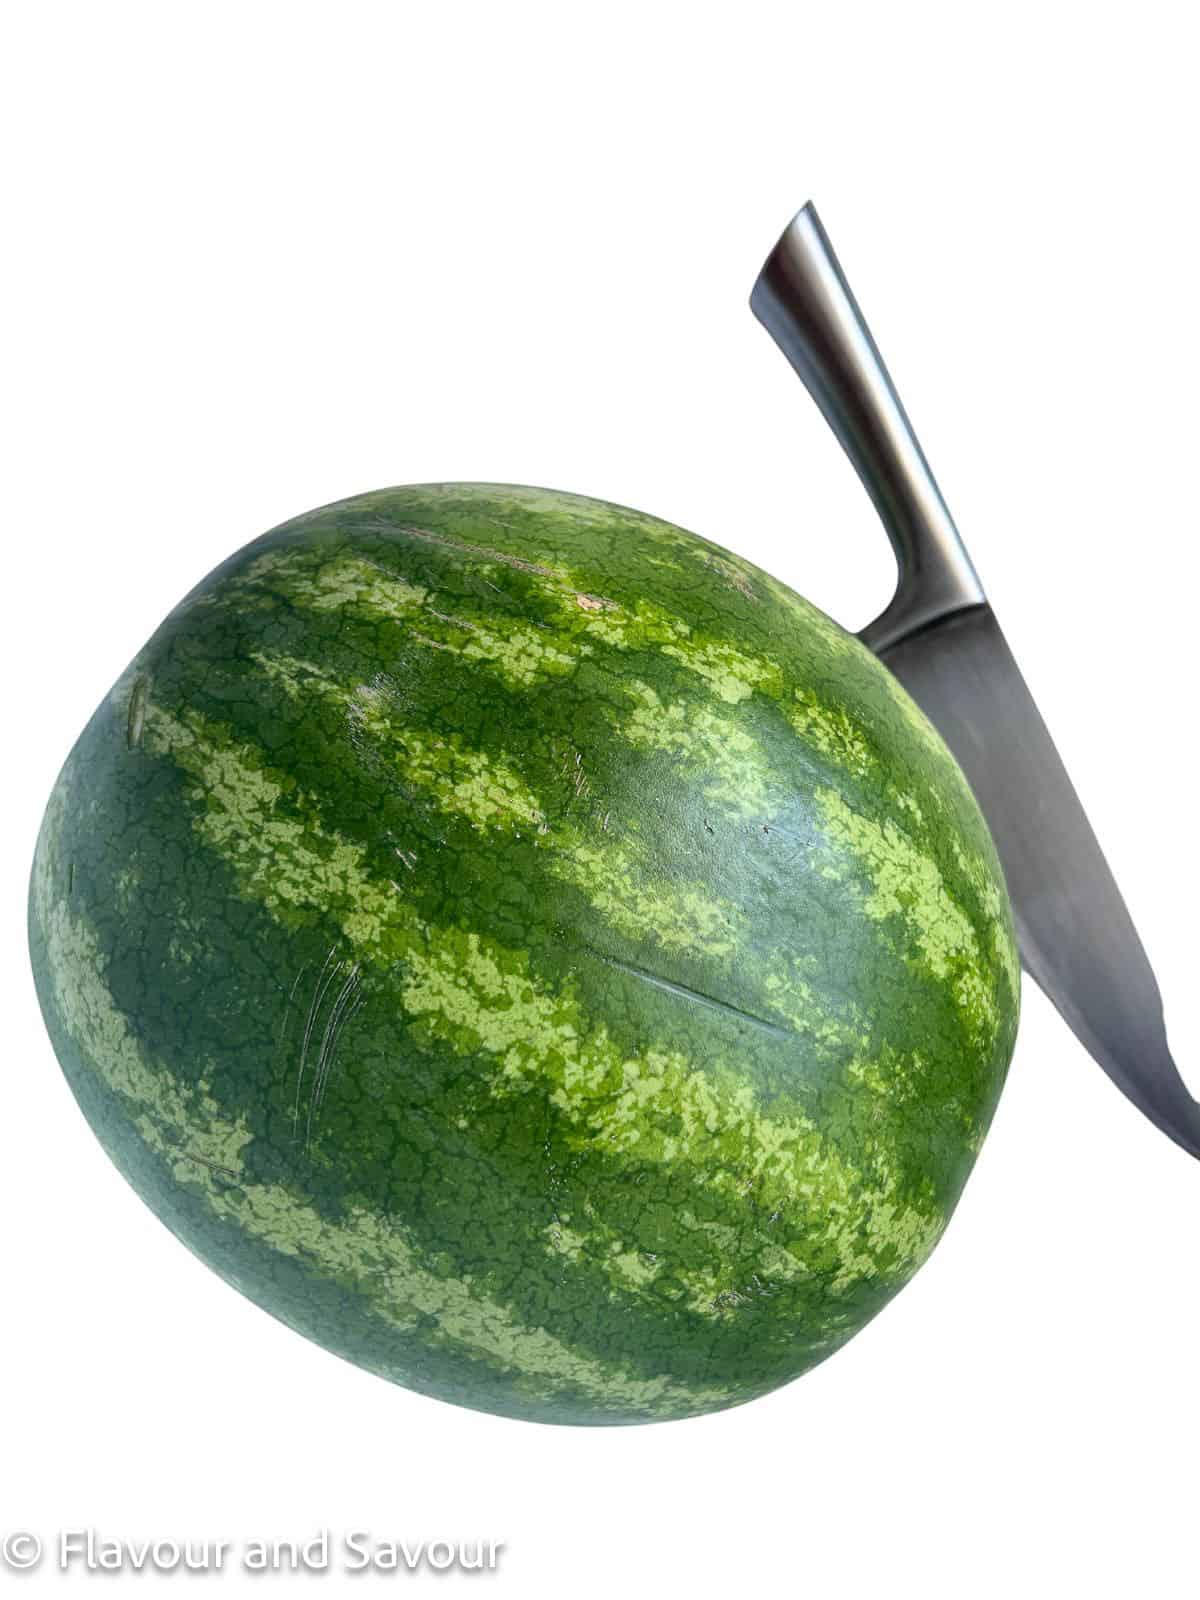 A whole watermelon with a knife beside it.